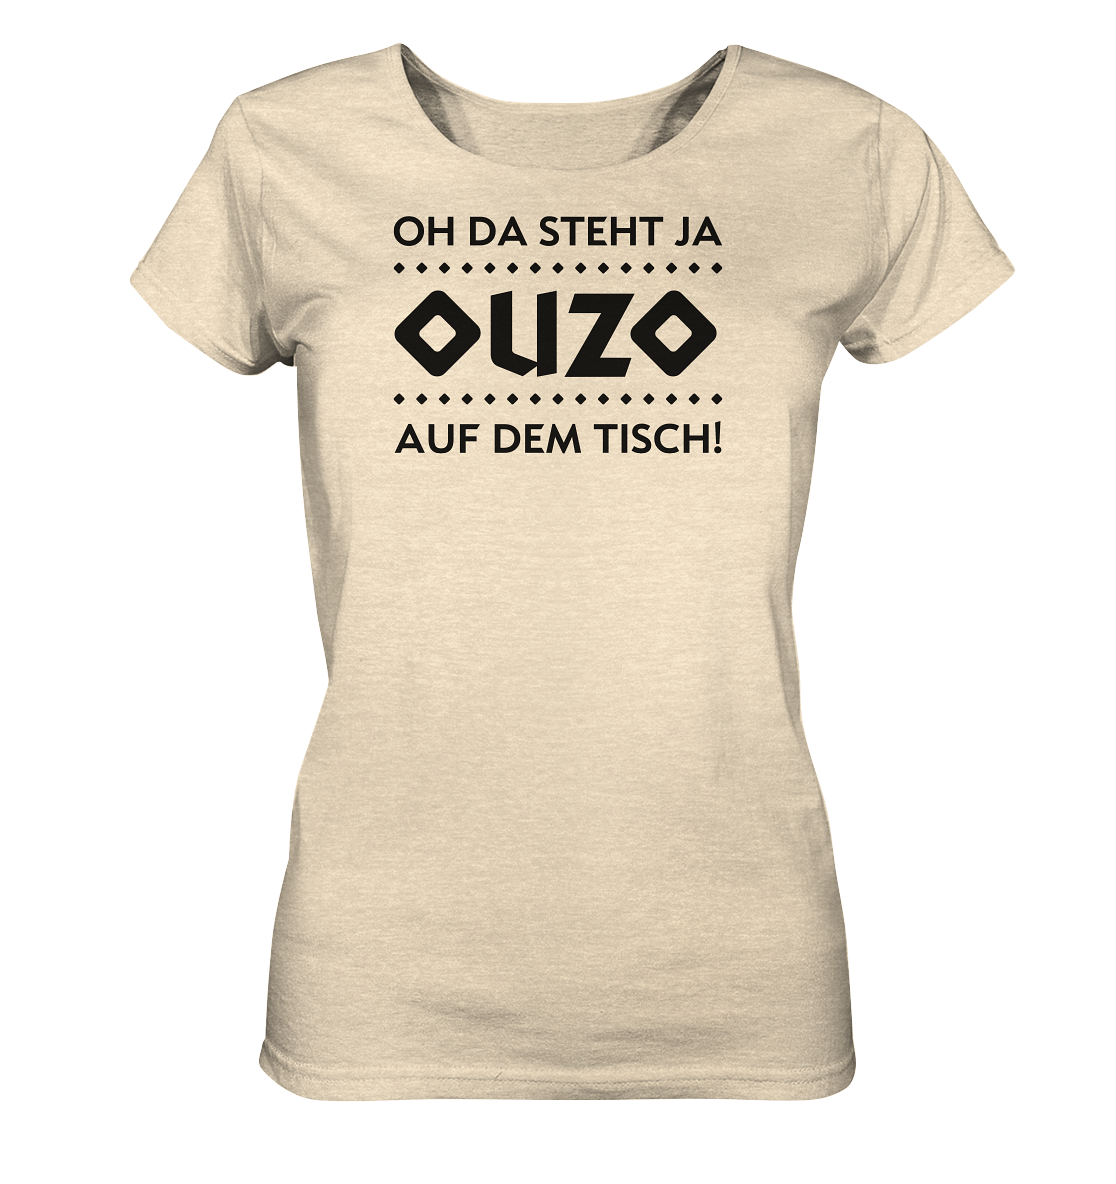 Oh, there’s ouzo on the table! - Ladies organic shirt